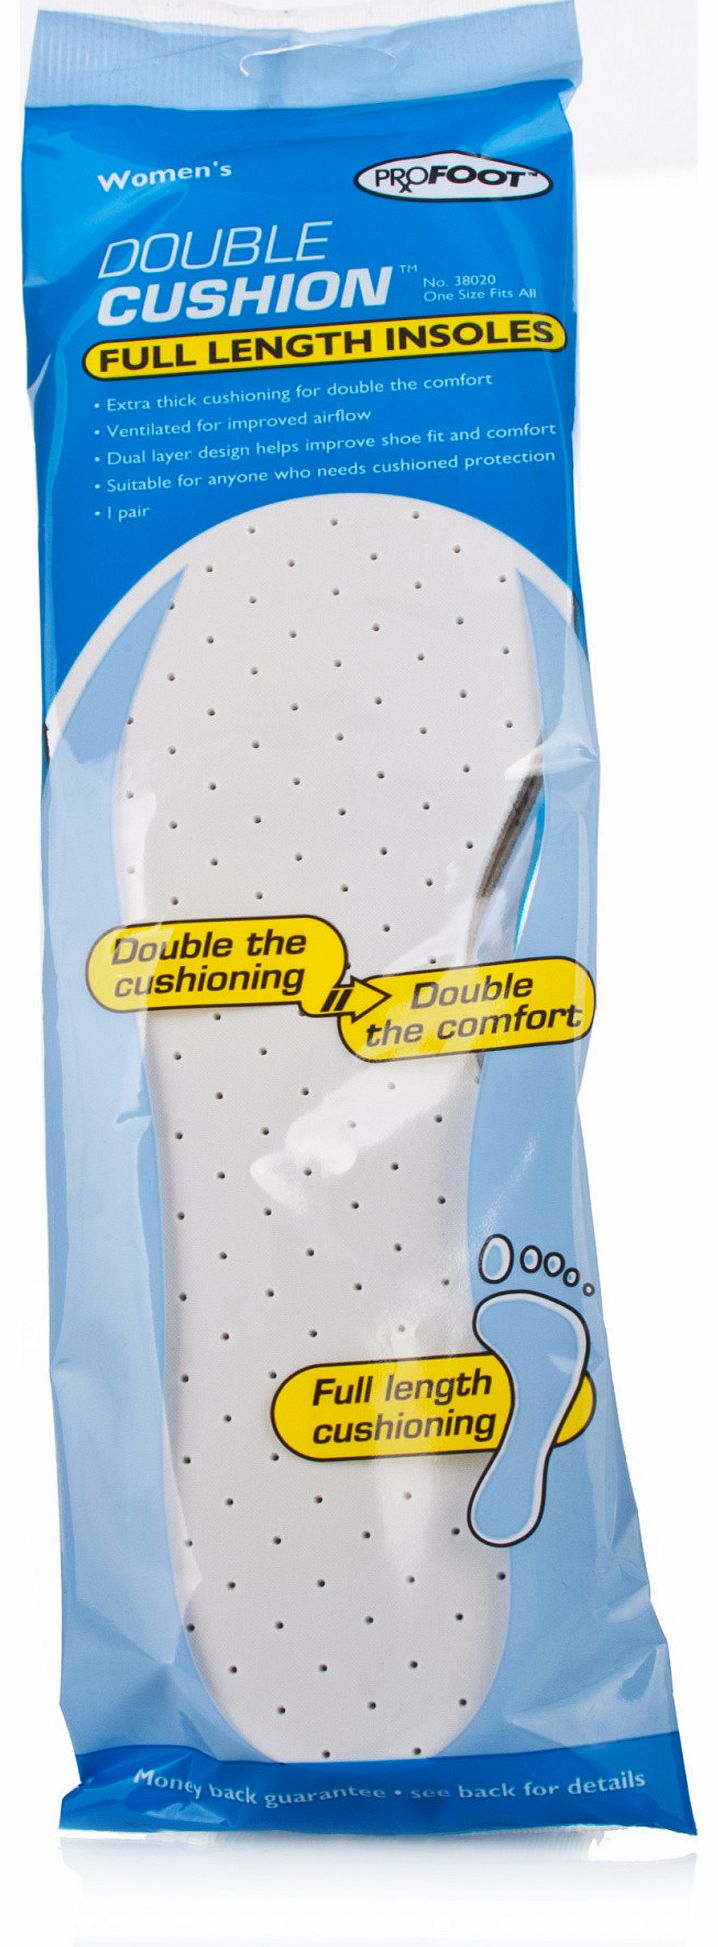 Profoot Womens Double Cushion Full Length Insoles